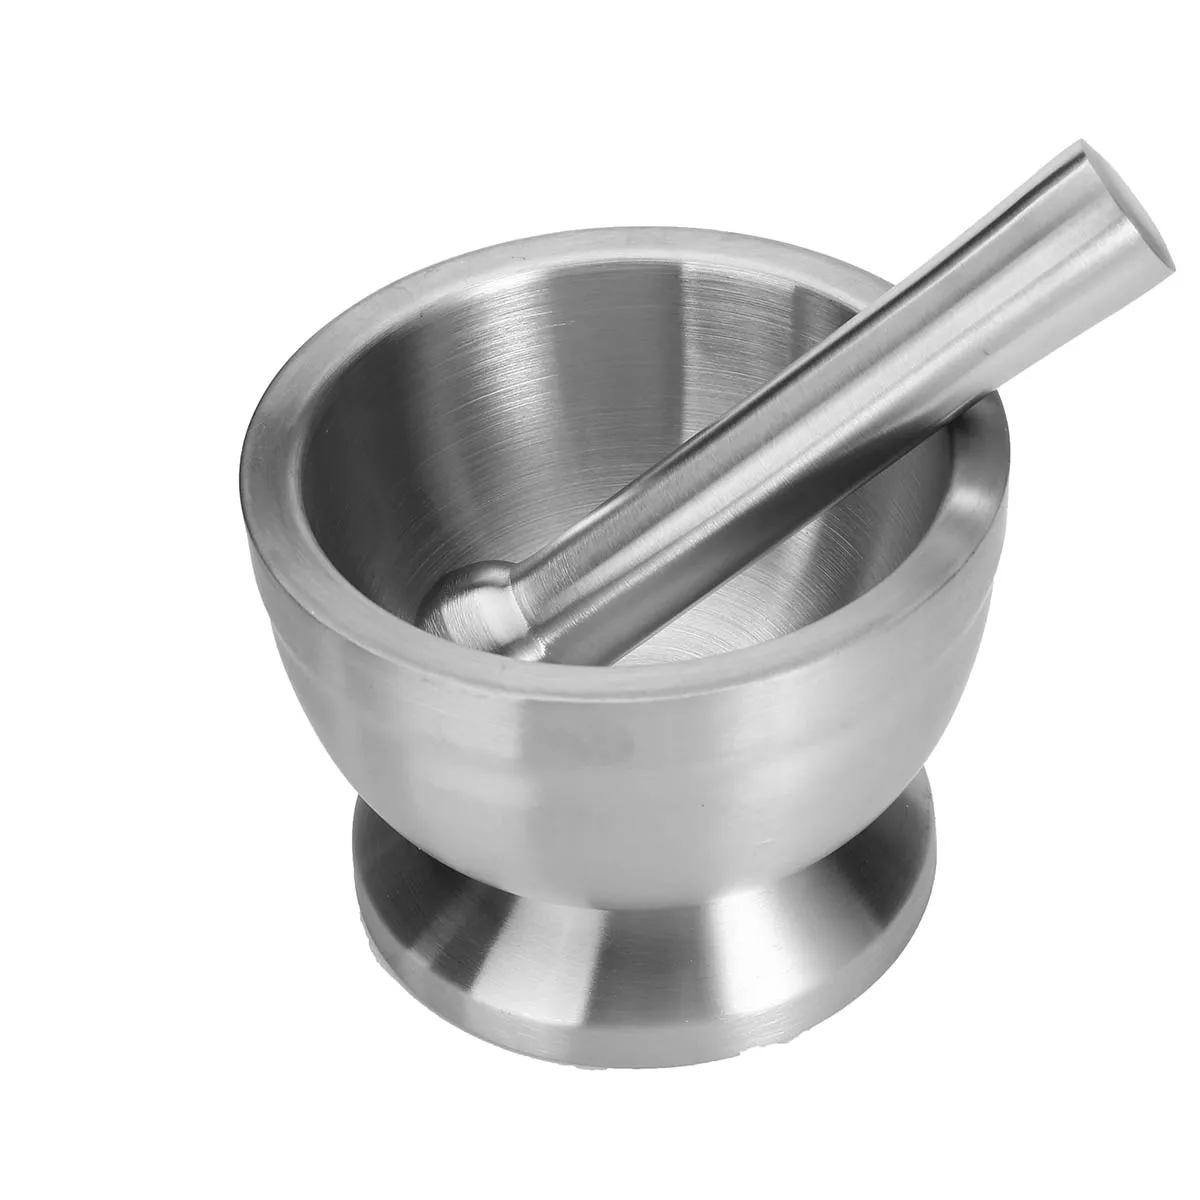 

Stainless Steel Grinding Set Mortar Pestle Garlic Herbs Coffee Crusher Spice Pill Mixing Grinding Crusher Bowl Kitchen Tools